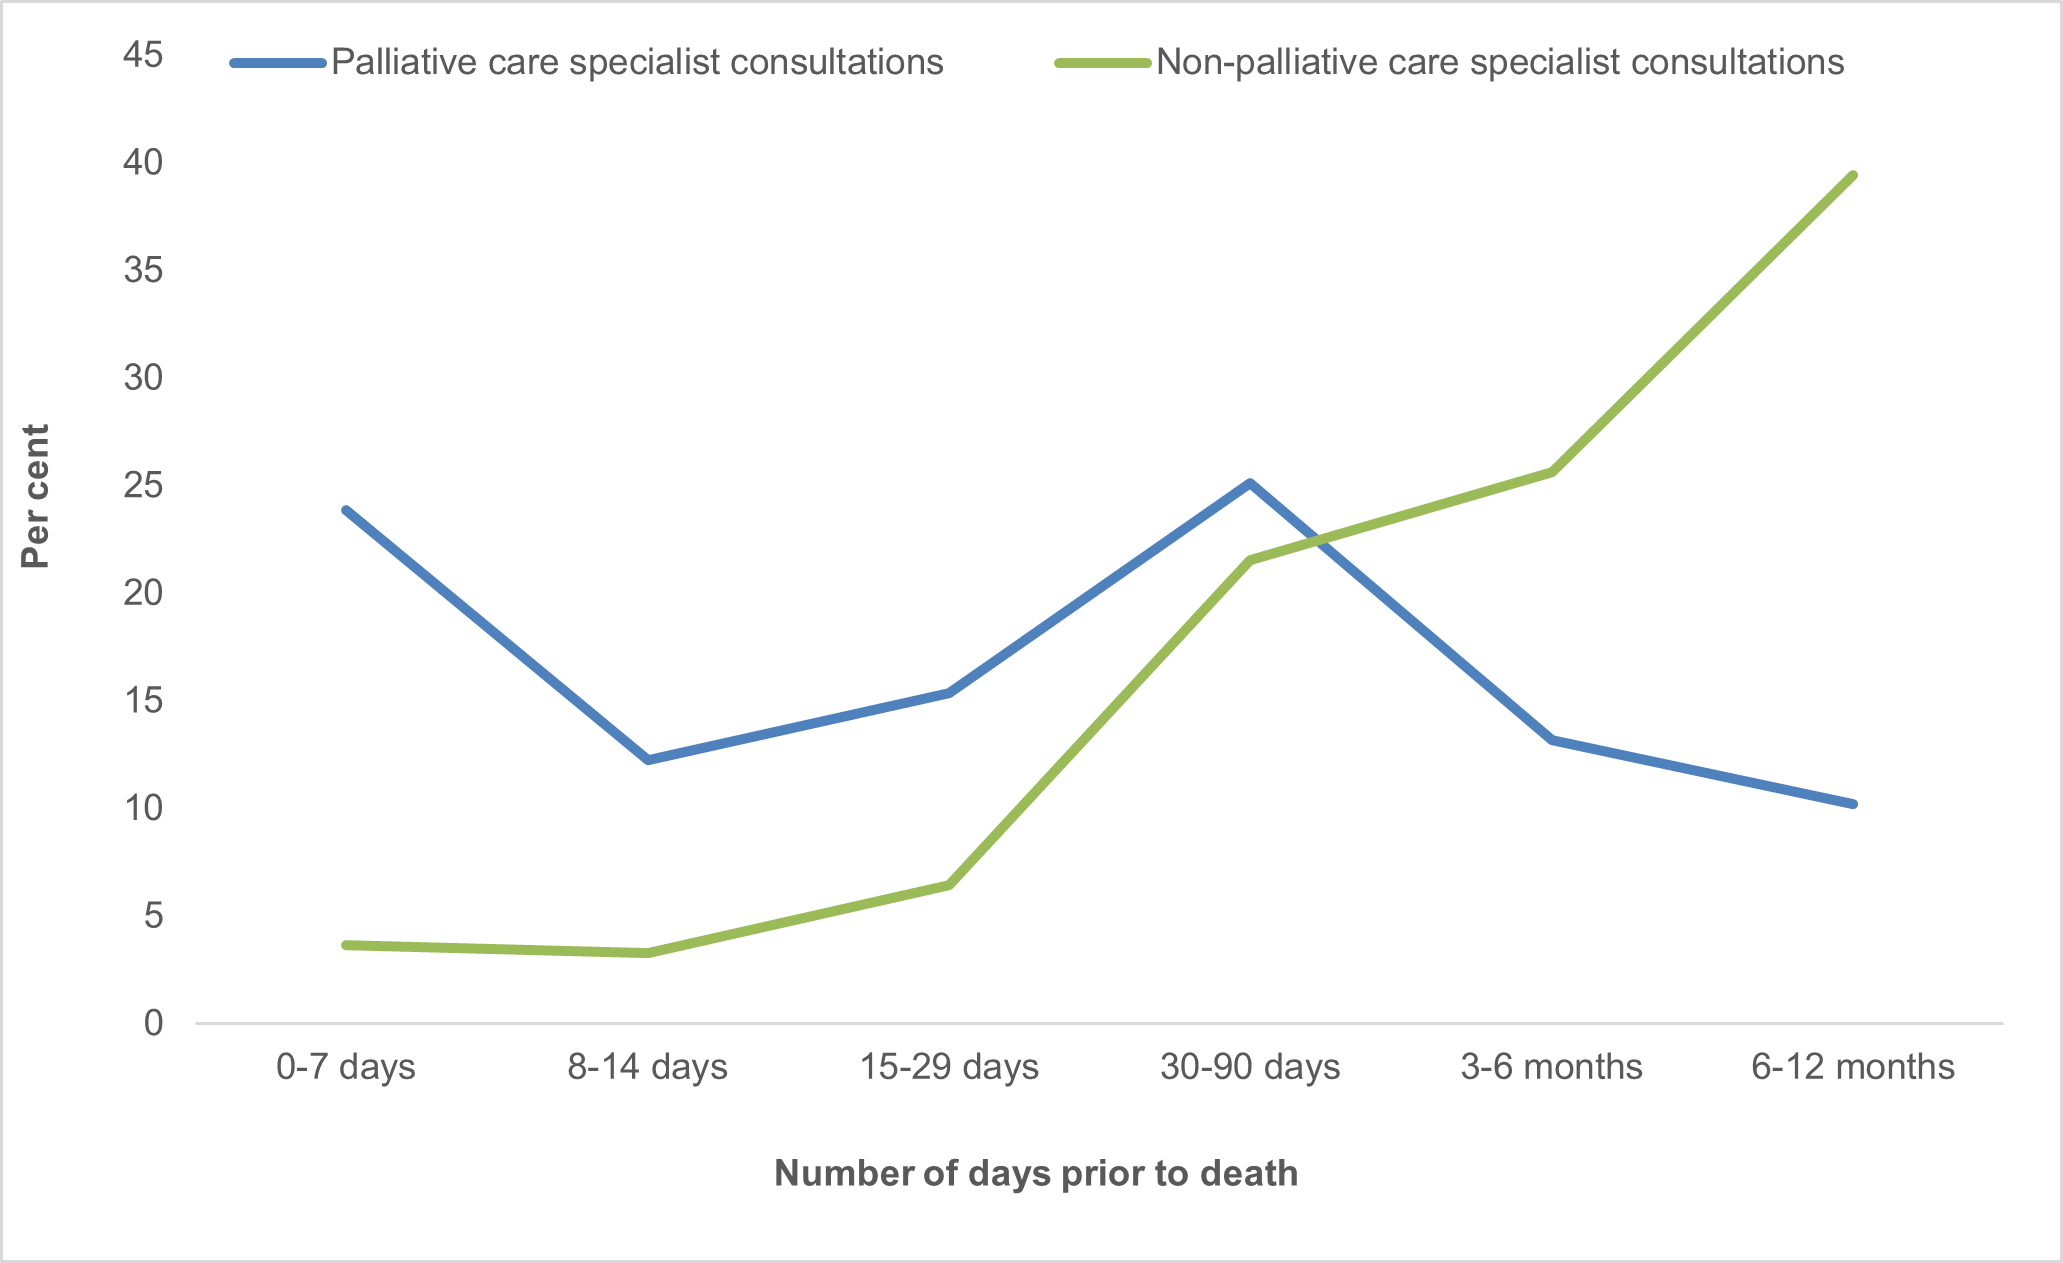 This figure shows the proportion of MBS specialist consultation services in the last year of life, by time intervals before death, for the SPC population comparing palliative care consultations versus non-palliative care specialist consultations.